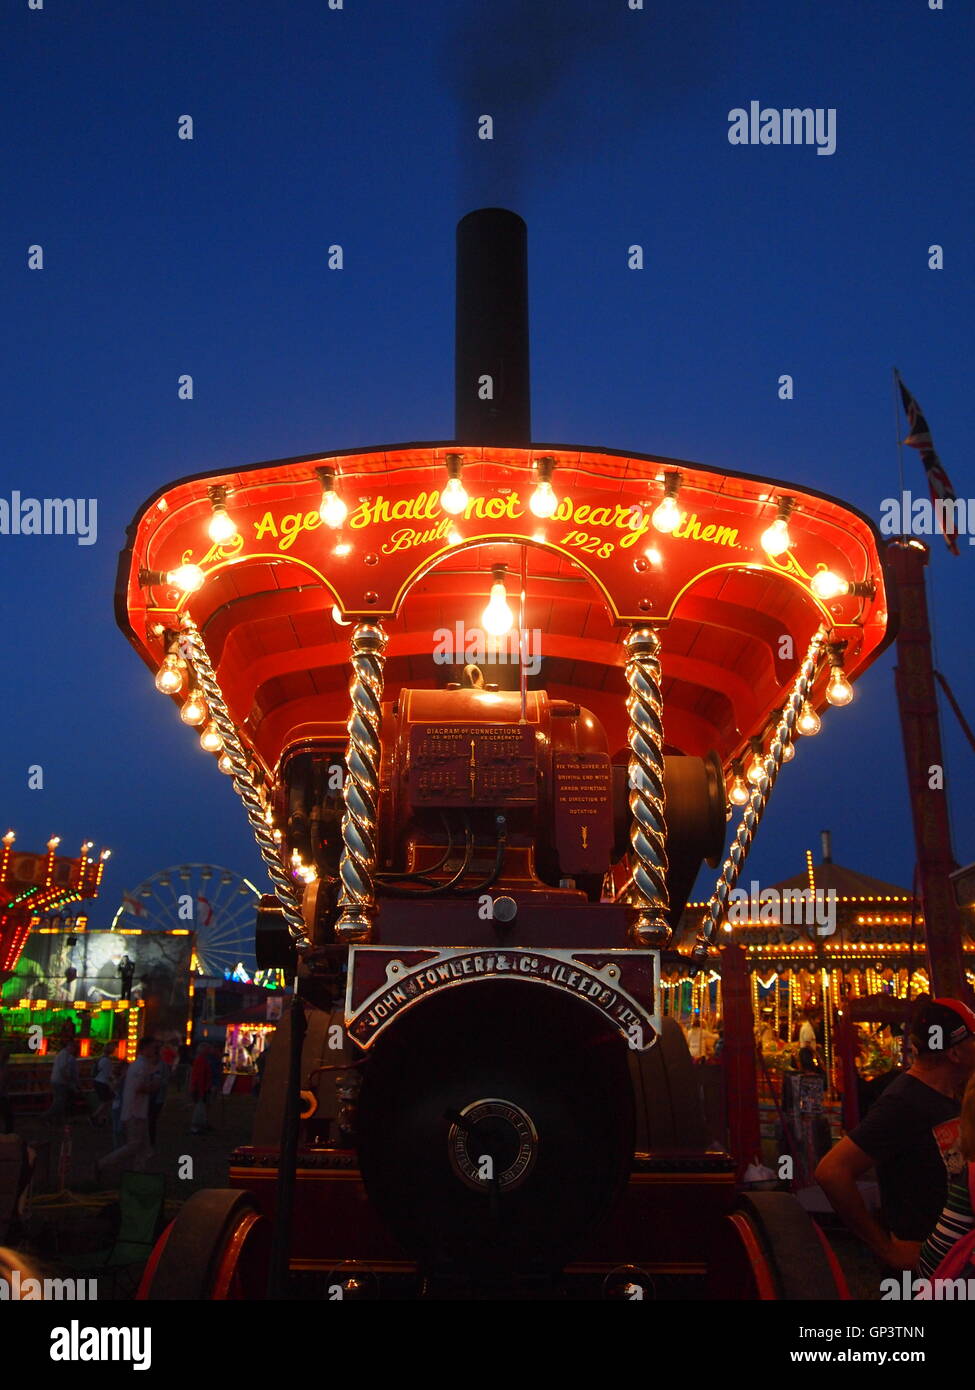 This is the front of a showmans steam traction engine lit up by its own generator and light bulbs, fun fair in the background Stock Photo